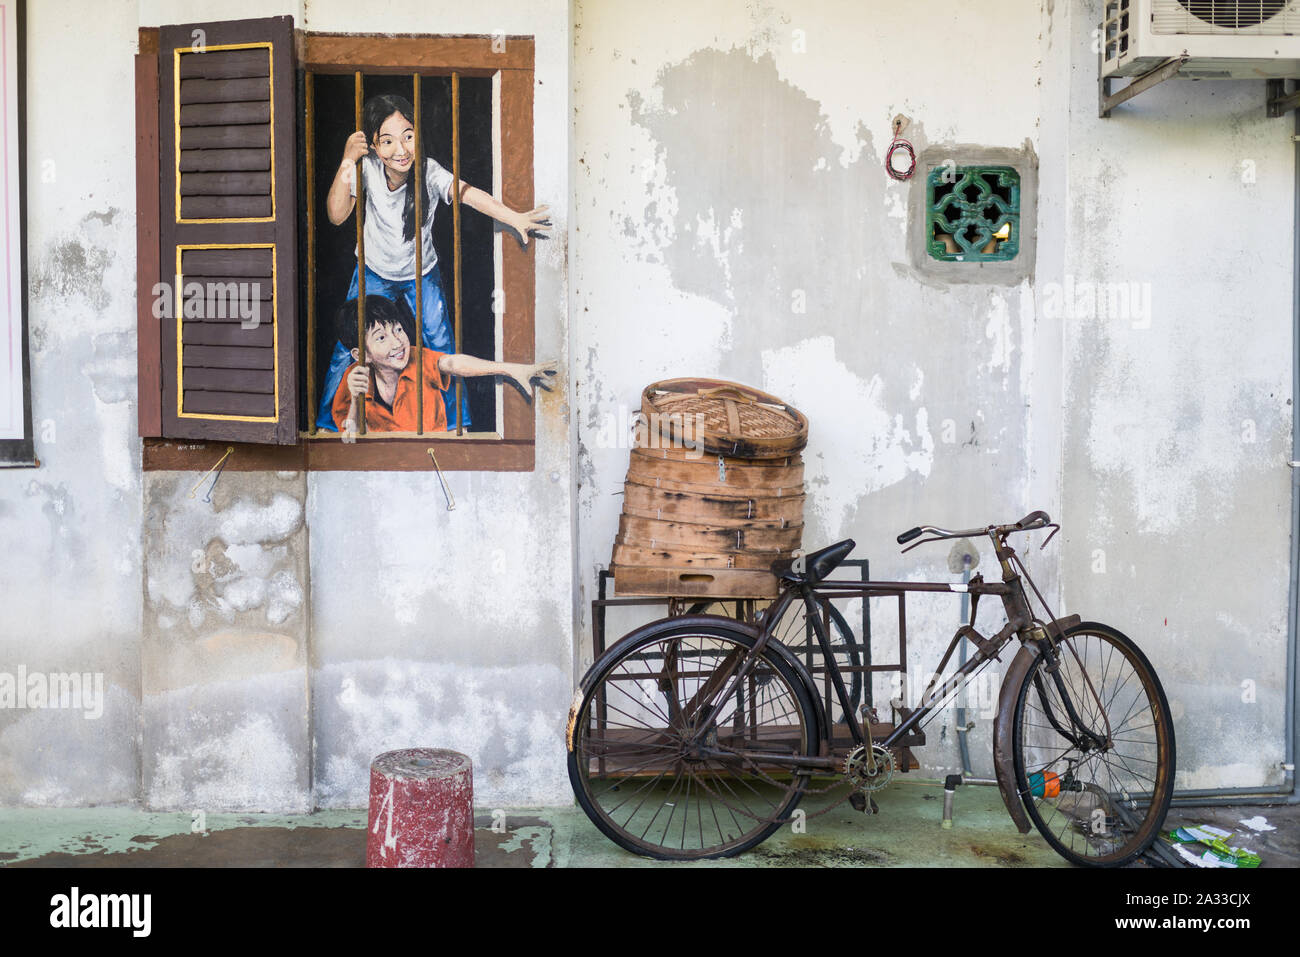 Penang, Malaysia, 09 Aug 2015: Famous Street Art Mural in George Town. Stock Photo